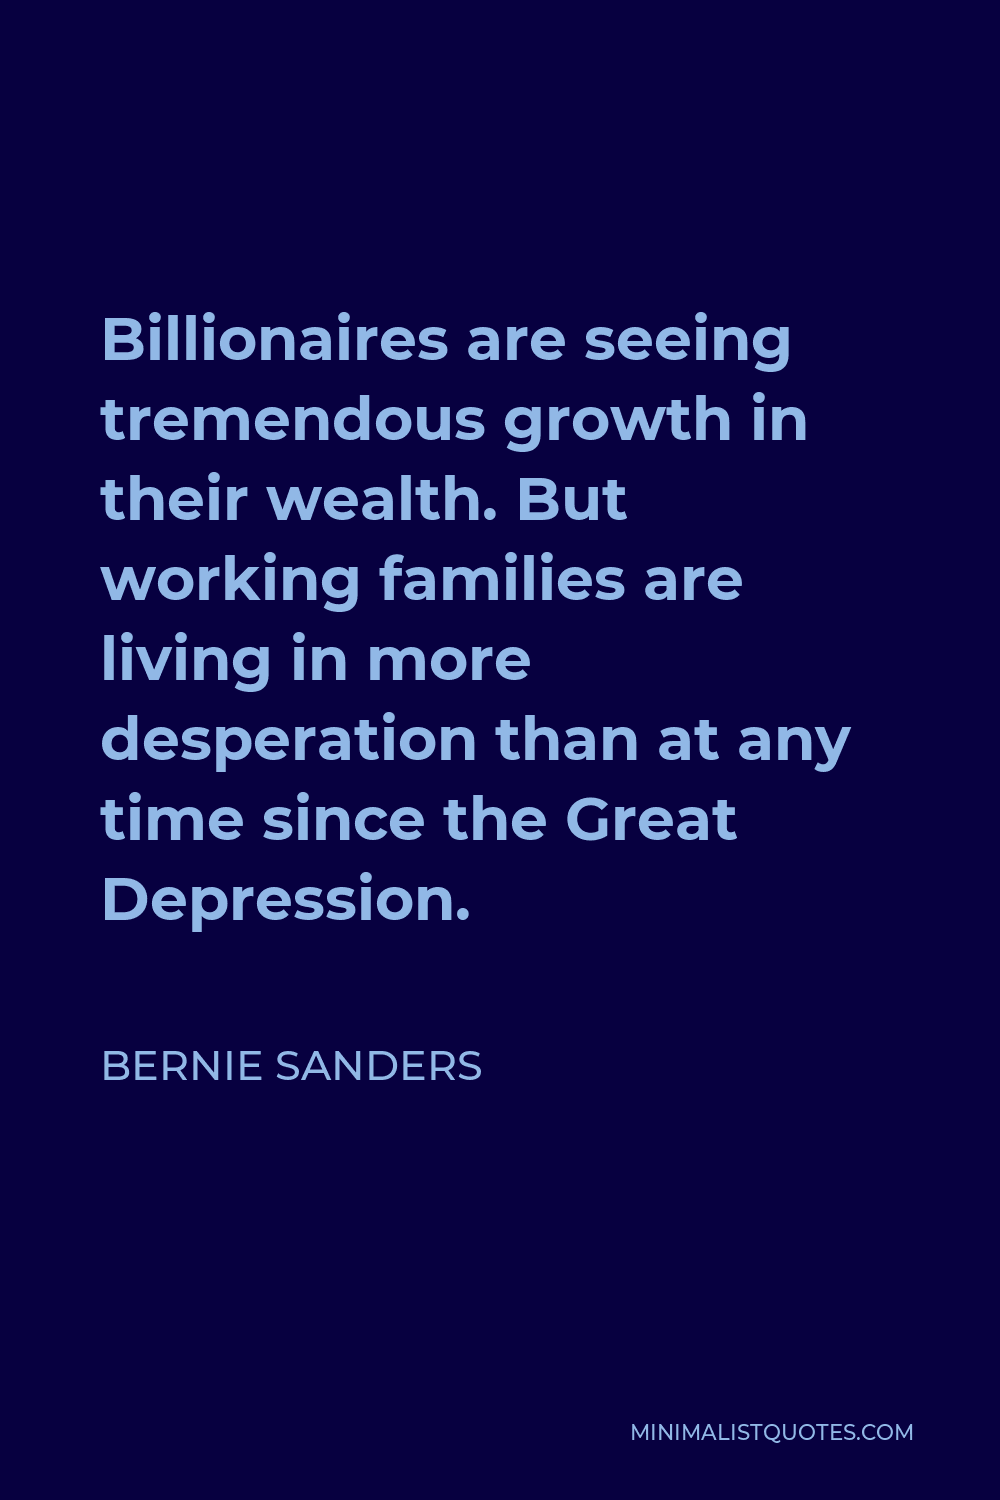 Bernie Sanders Quote - Billionaires are seeing tremendous growth in their wealth. But working families are living in more desperation than at any time since the Great Depression.